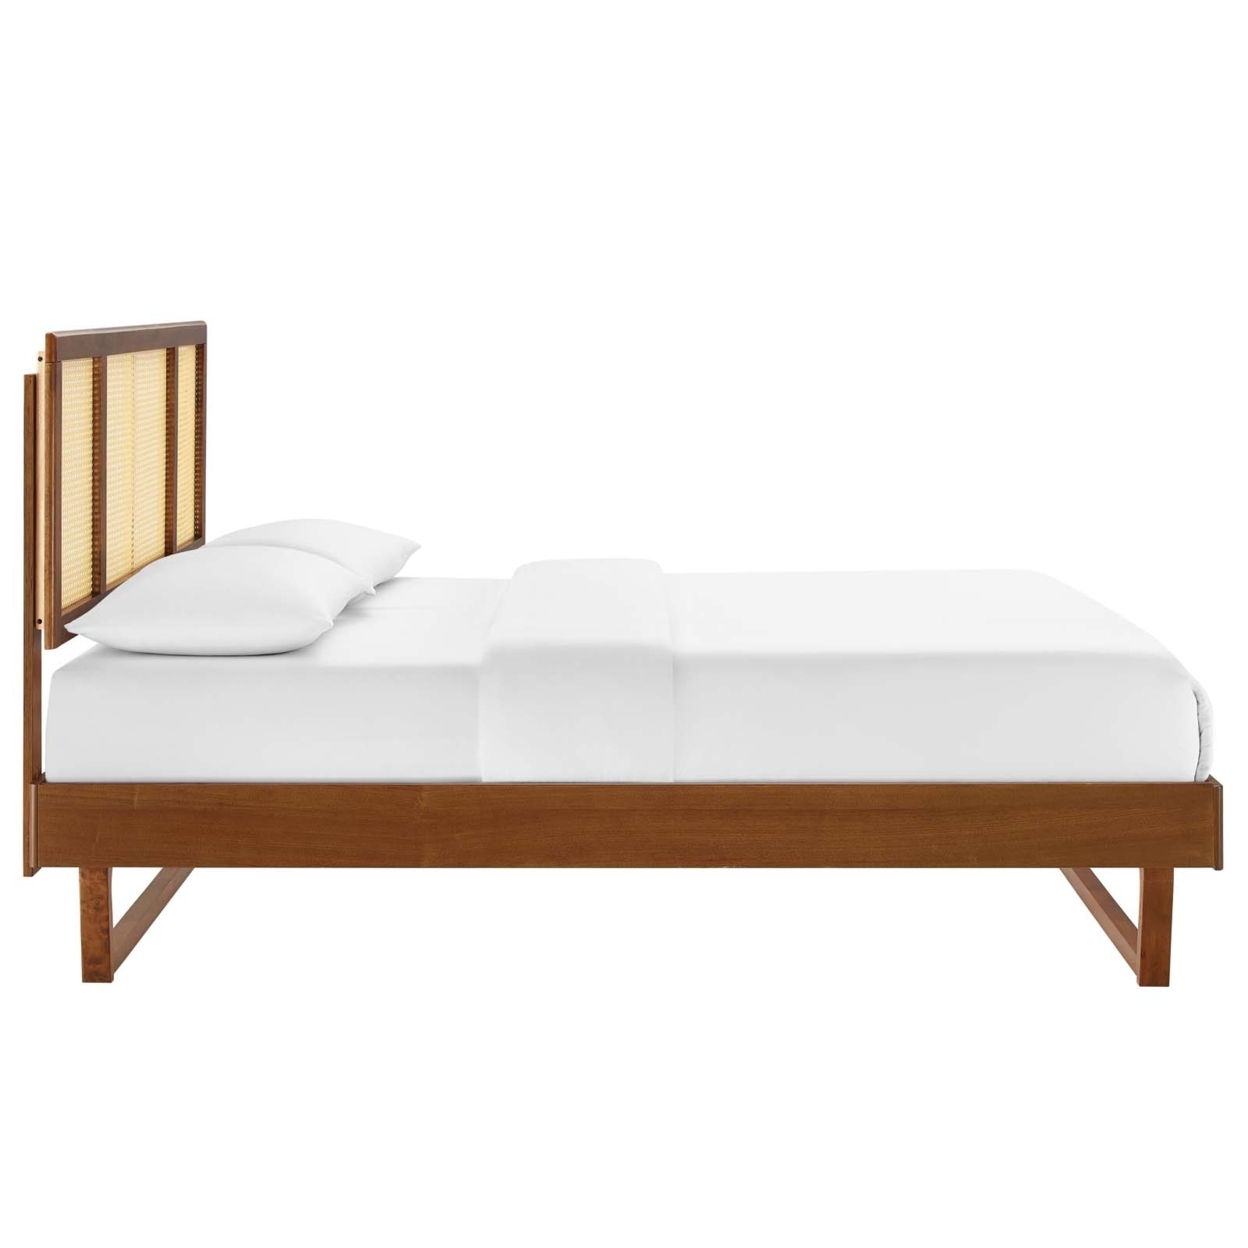 Kelsea Cane And Wood Queen Platform Bed With Angular Legs, Walnut